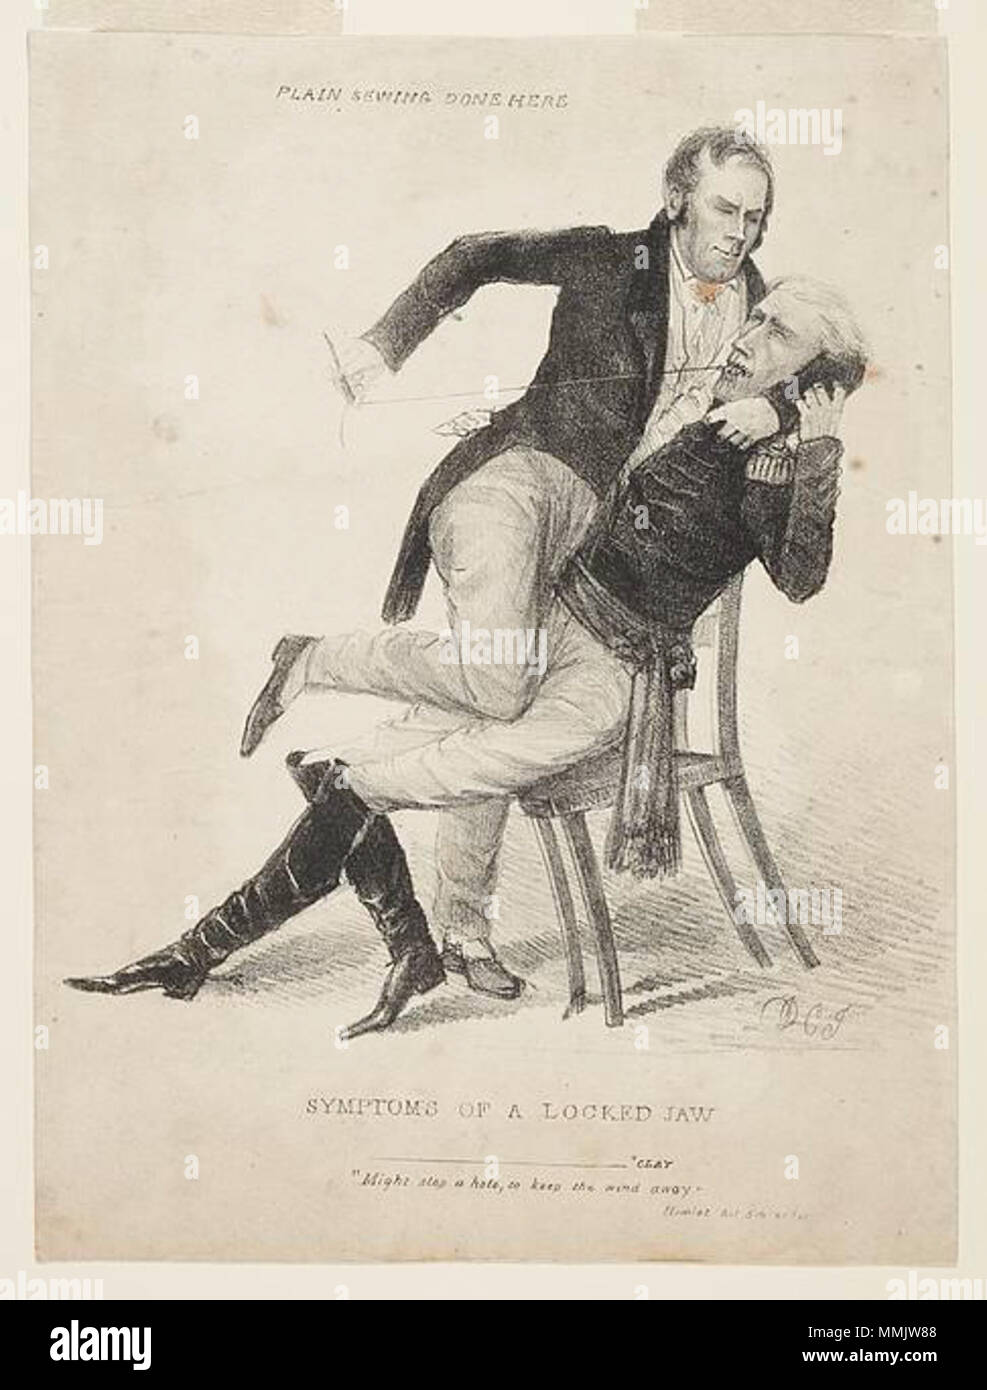 .  English: The caricature appeared in the Niles Weekly Register (see Hezekiah Niles) on January 5 and 12, 1828, regarding the 'Corrupt Bargain' accusations made my presidentail candidate Andrew Jackson against Secretary of State Henry clay in 1824. Secretary Clay is shown restraining a seated, uniformed General Jackson and sewing up his mouth. From Clay's pocket protrudes a slip of paper reading, 'cure for calumny.' Below the image is a quote from Shakespeare's 'Hamlet,' '. . Clay might stop a hole, to keep the wind away.' On the wall behind him are the words 'Plain sewing done here.'  Sympto Stock Photo